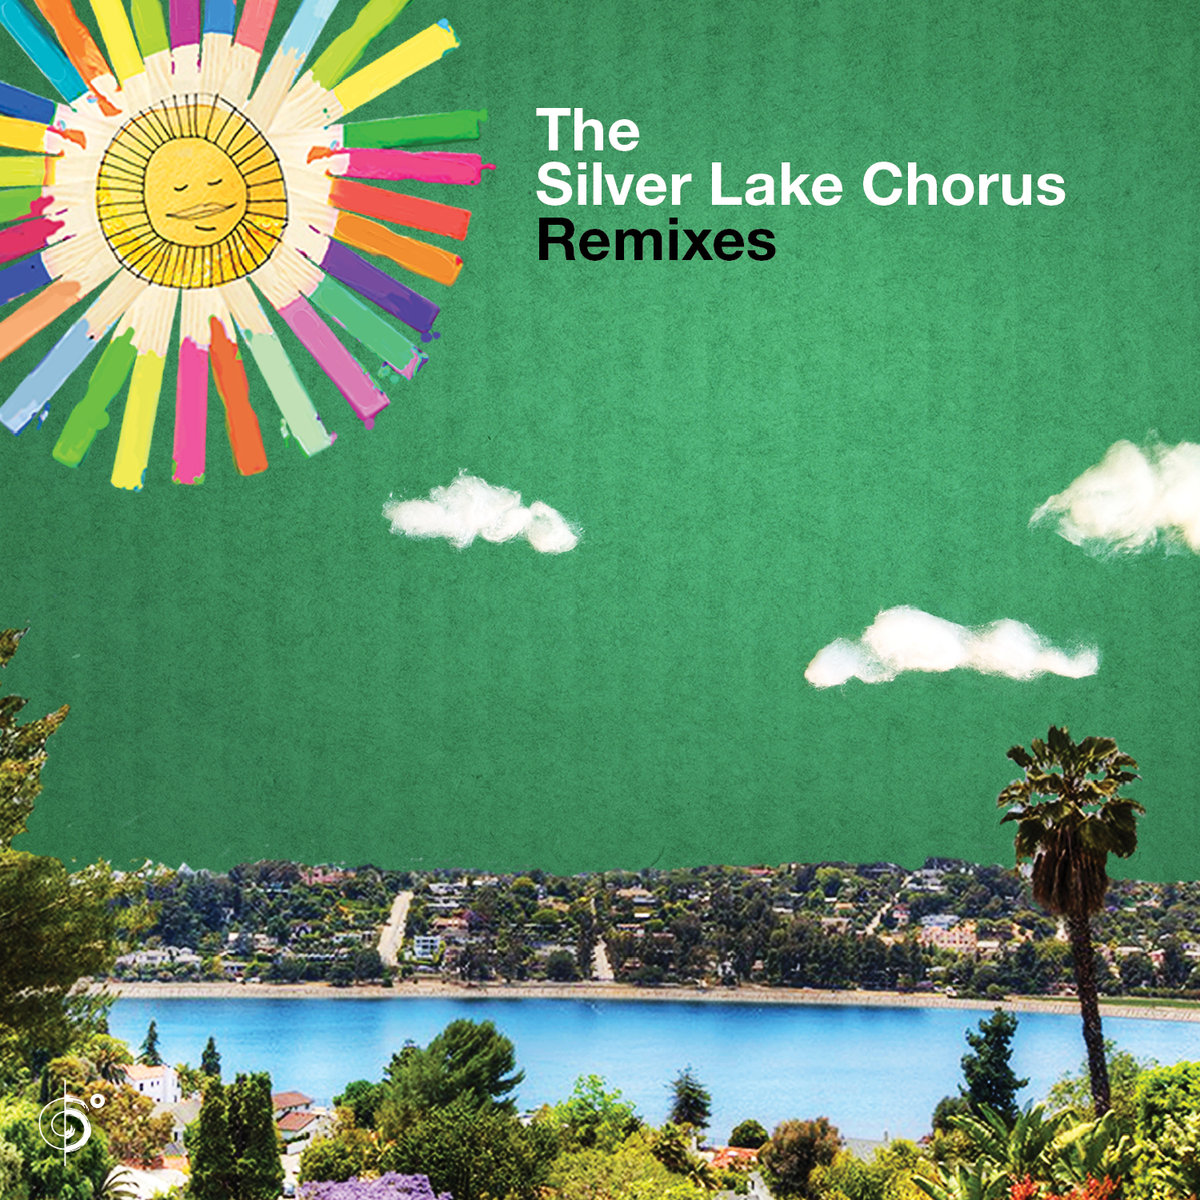 The Silver Lake Chorus Remixes Available Now!